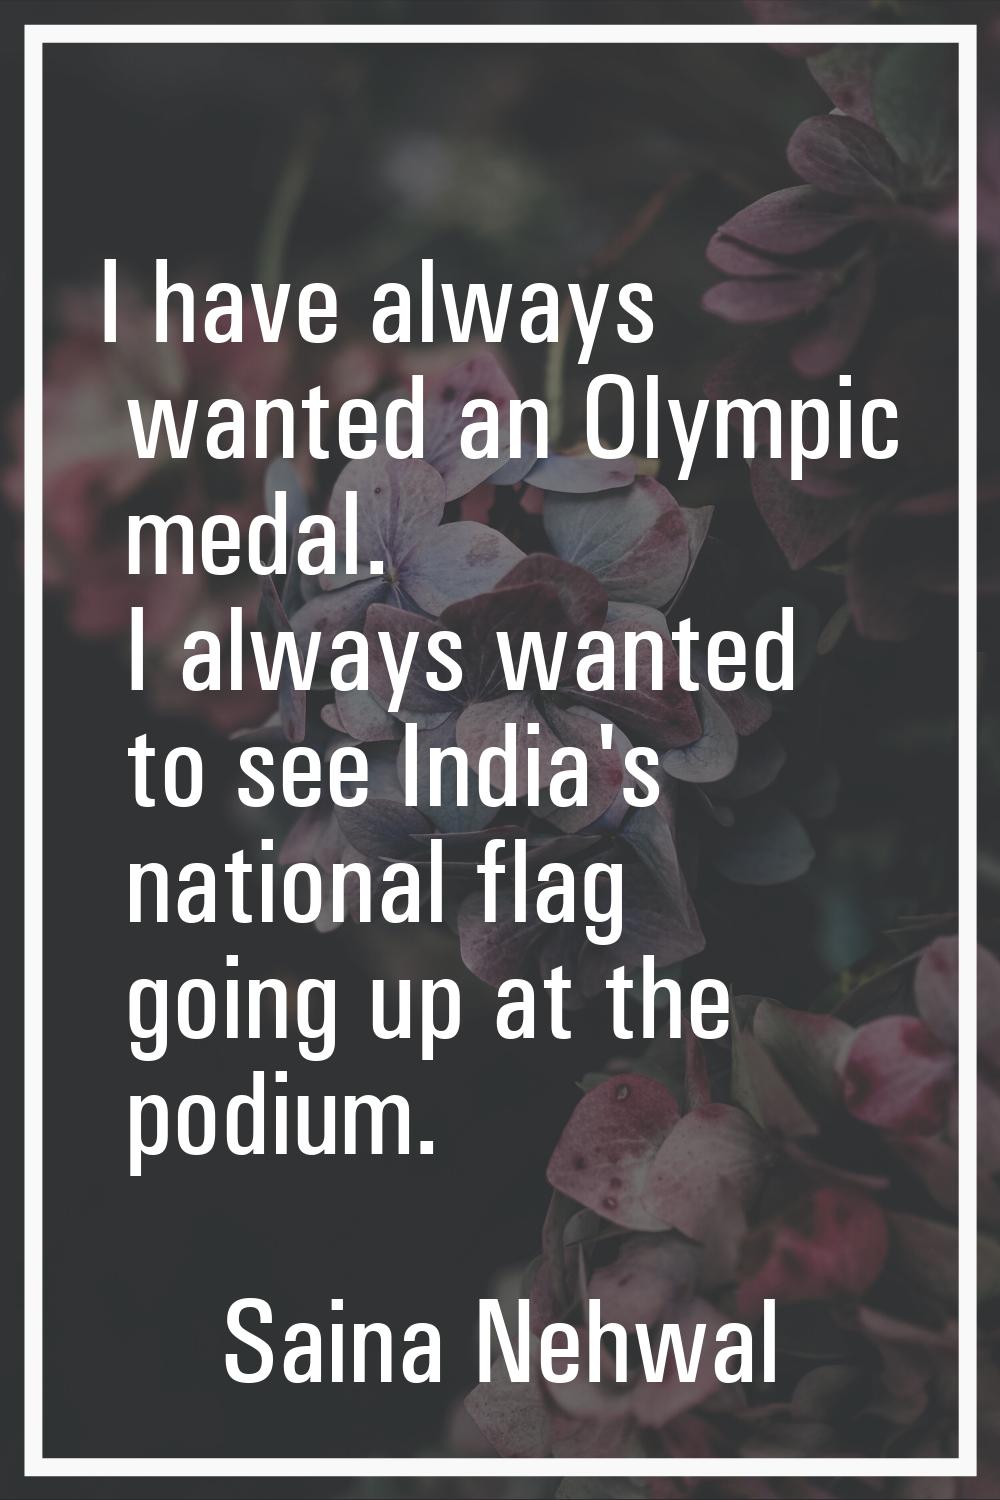 I have always wanted an Olympic medal. I always wanted to see India's national flag going up at the